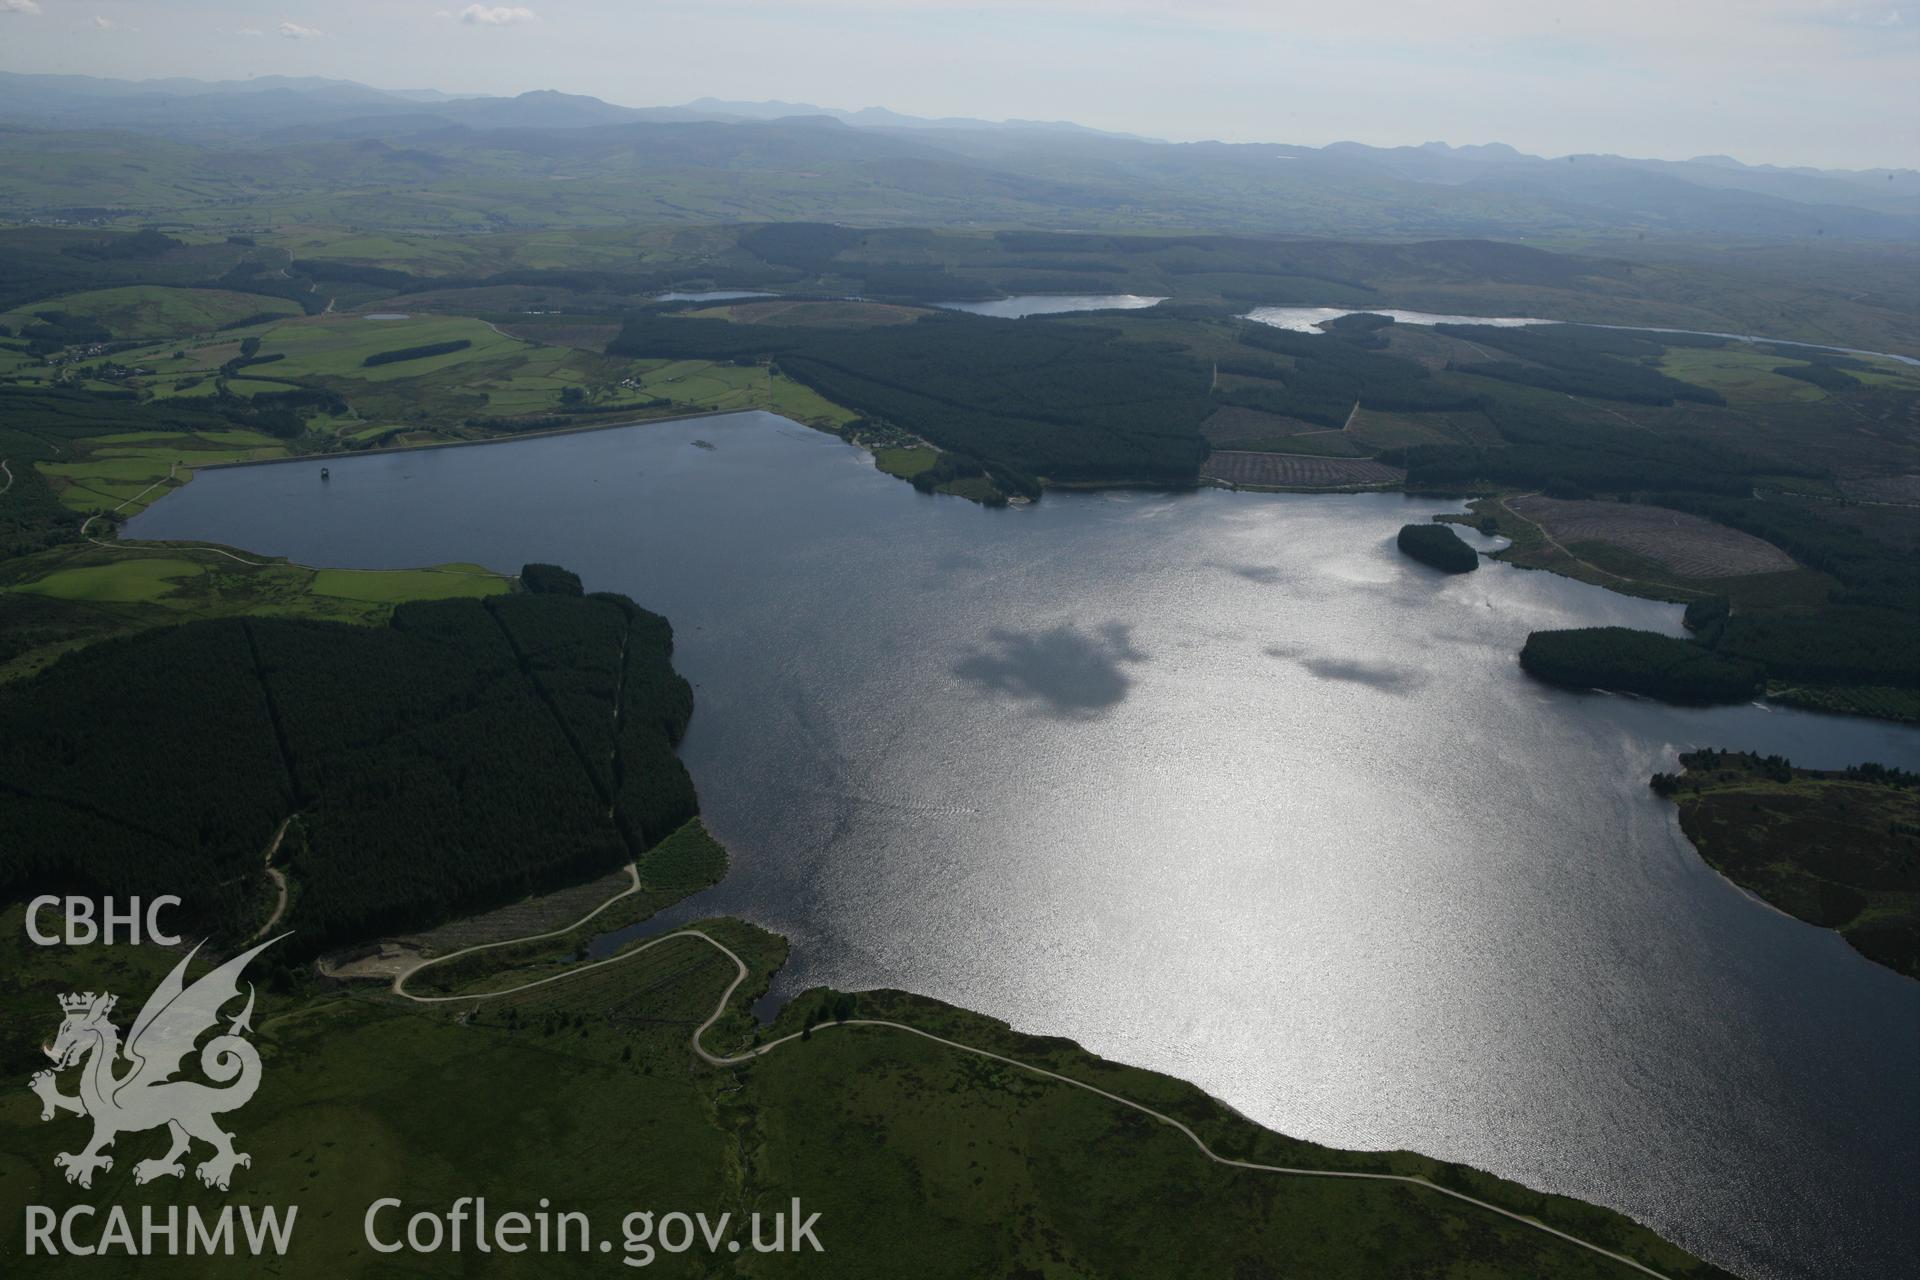 RCAHMW colour oblique aerial photograph showing landscape of Llyn Brenig. Taken on 31 July 2007 by Toby Driver